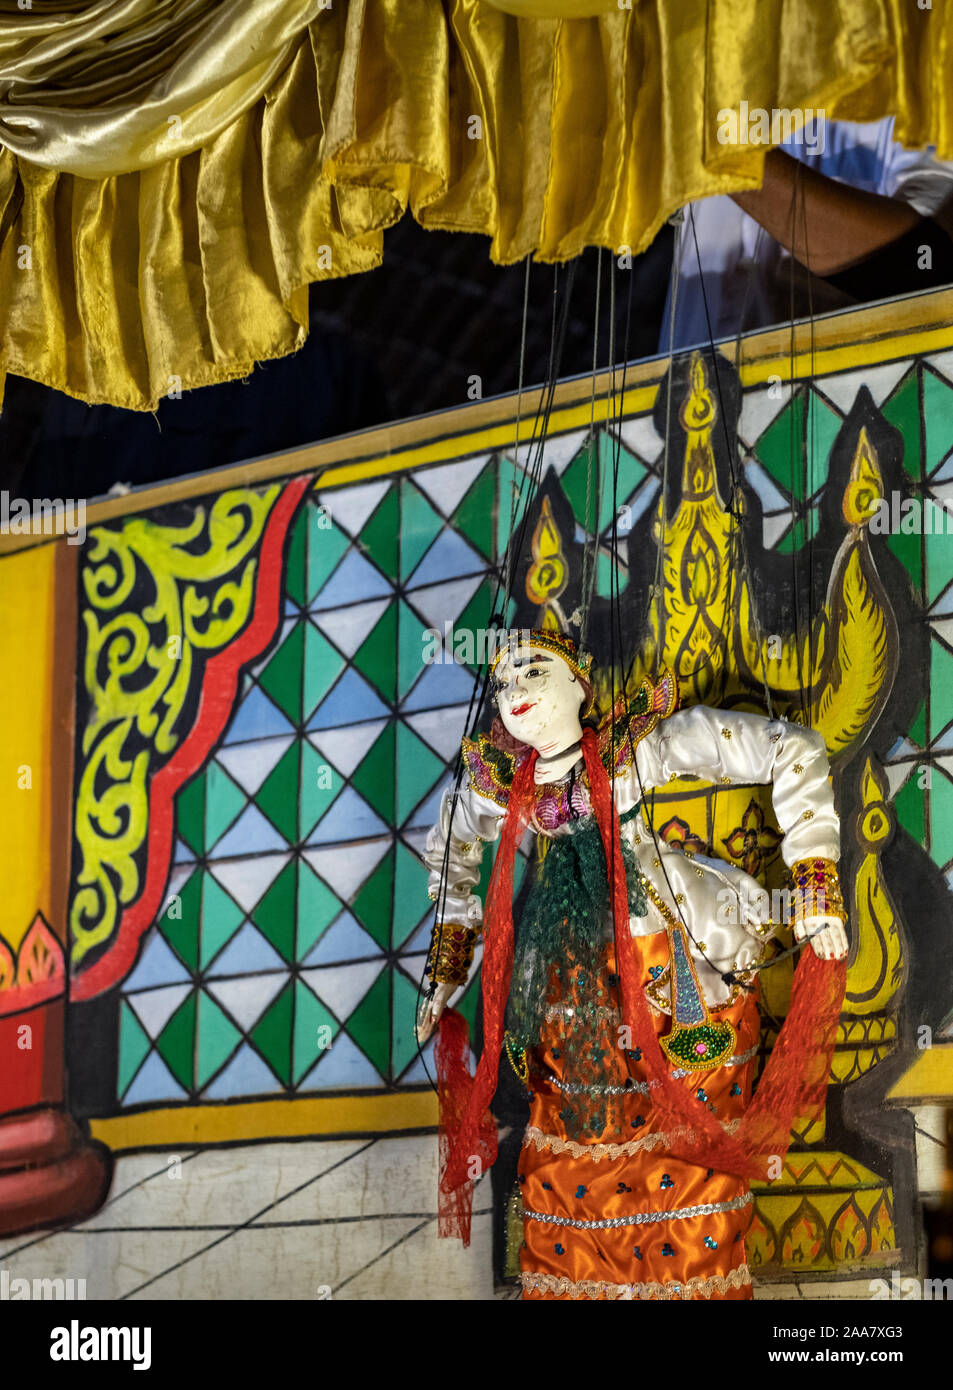 Colorful puppet theater with puppets representing Buddhist allegories and performed by experienced puppeteers behind a curtain in Bagan, Myanmar/Burma Stock Photo